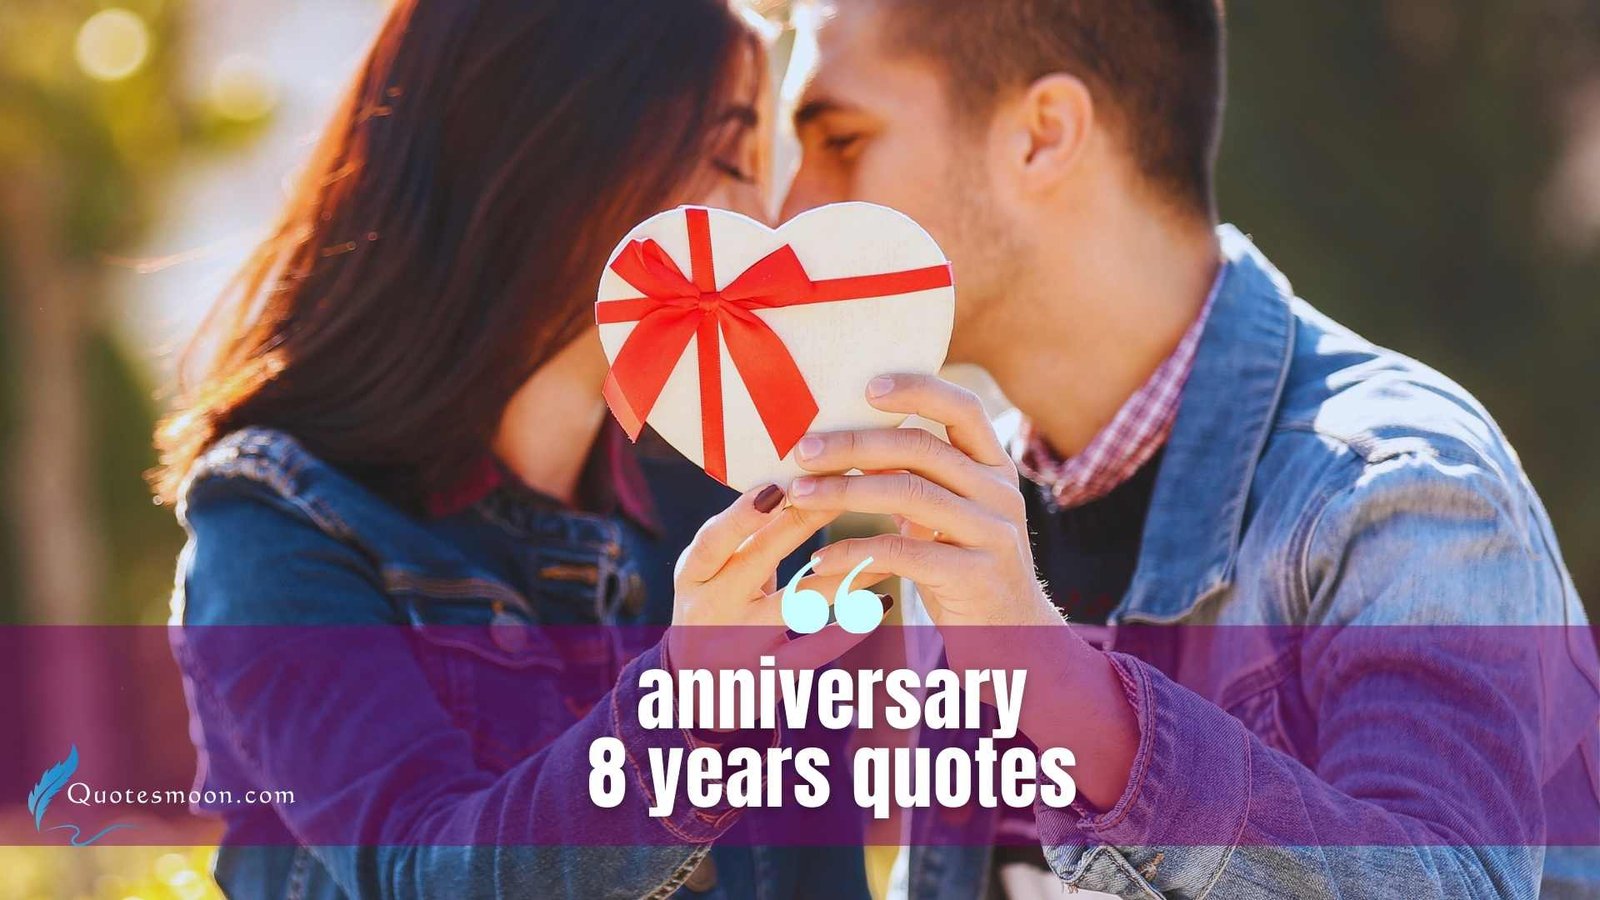 anniversary 8 years quotes images